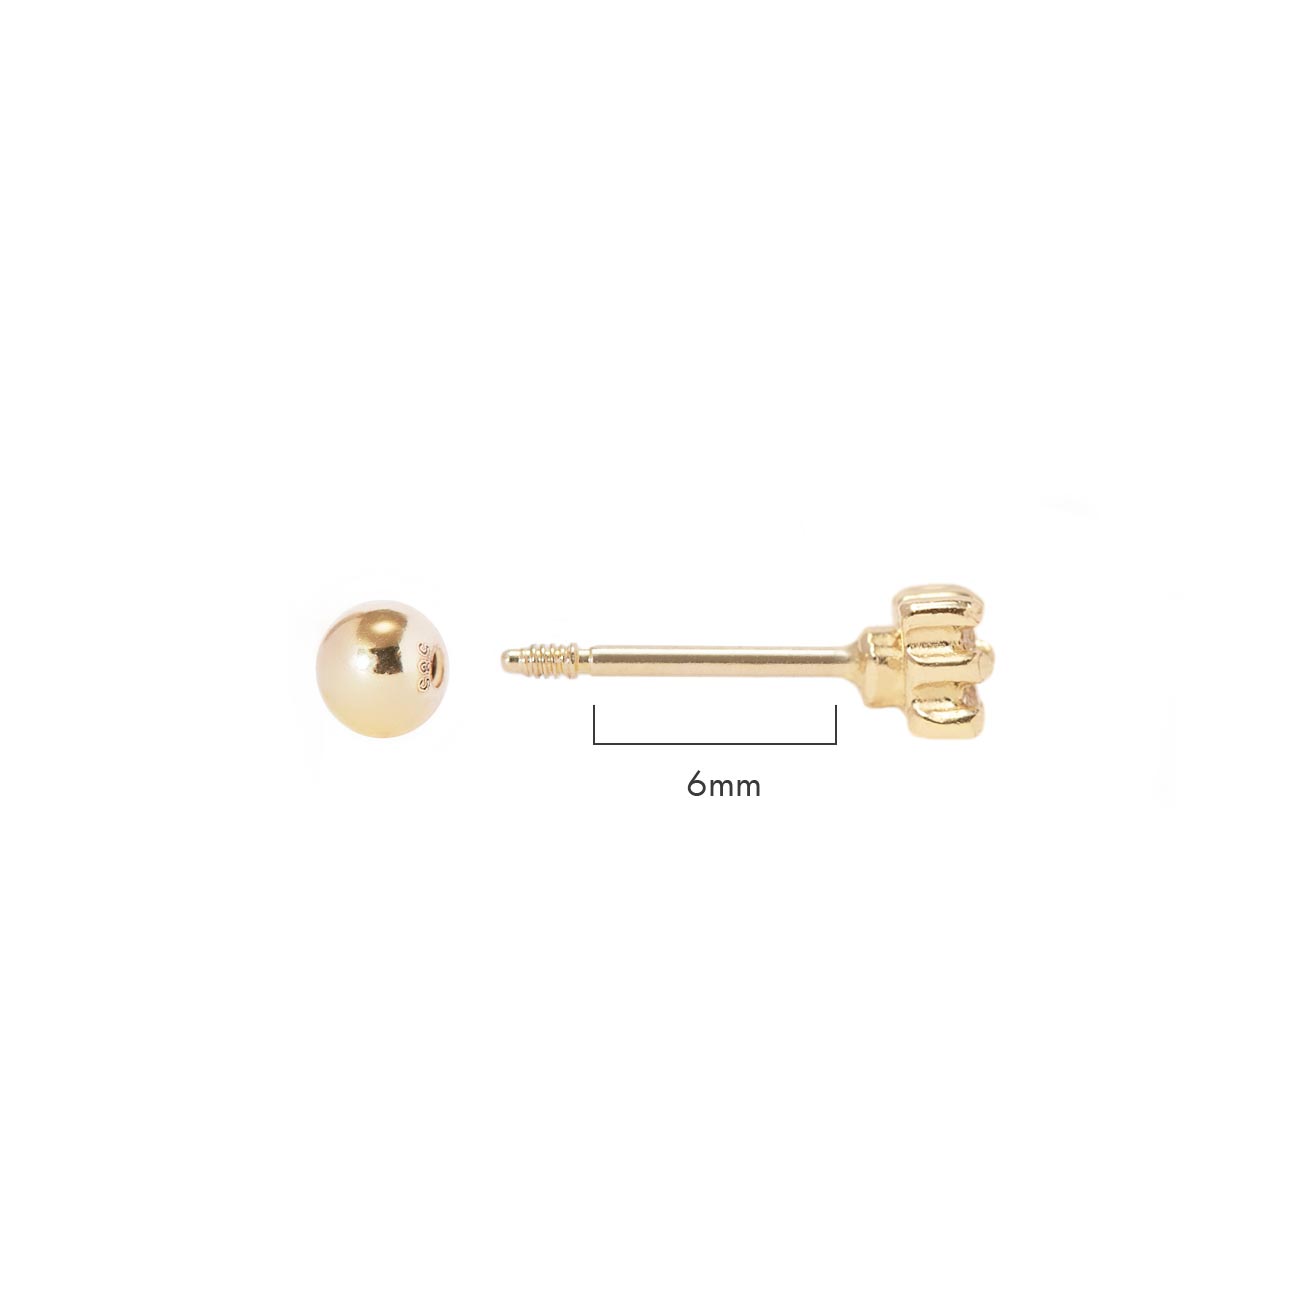 Reversible 4mm Crystal and Ball Screw Back Earrings in 14k Yellow Gold